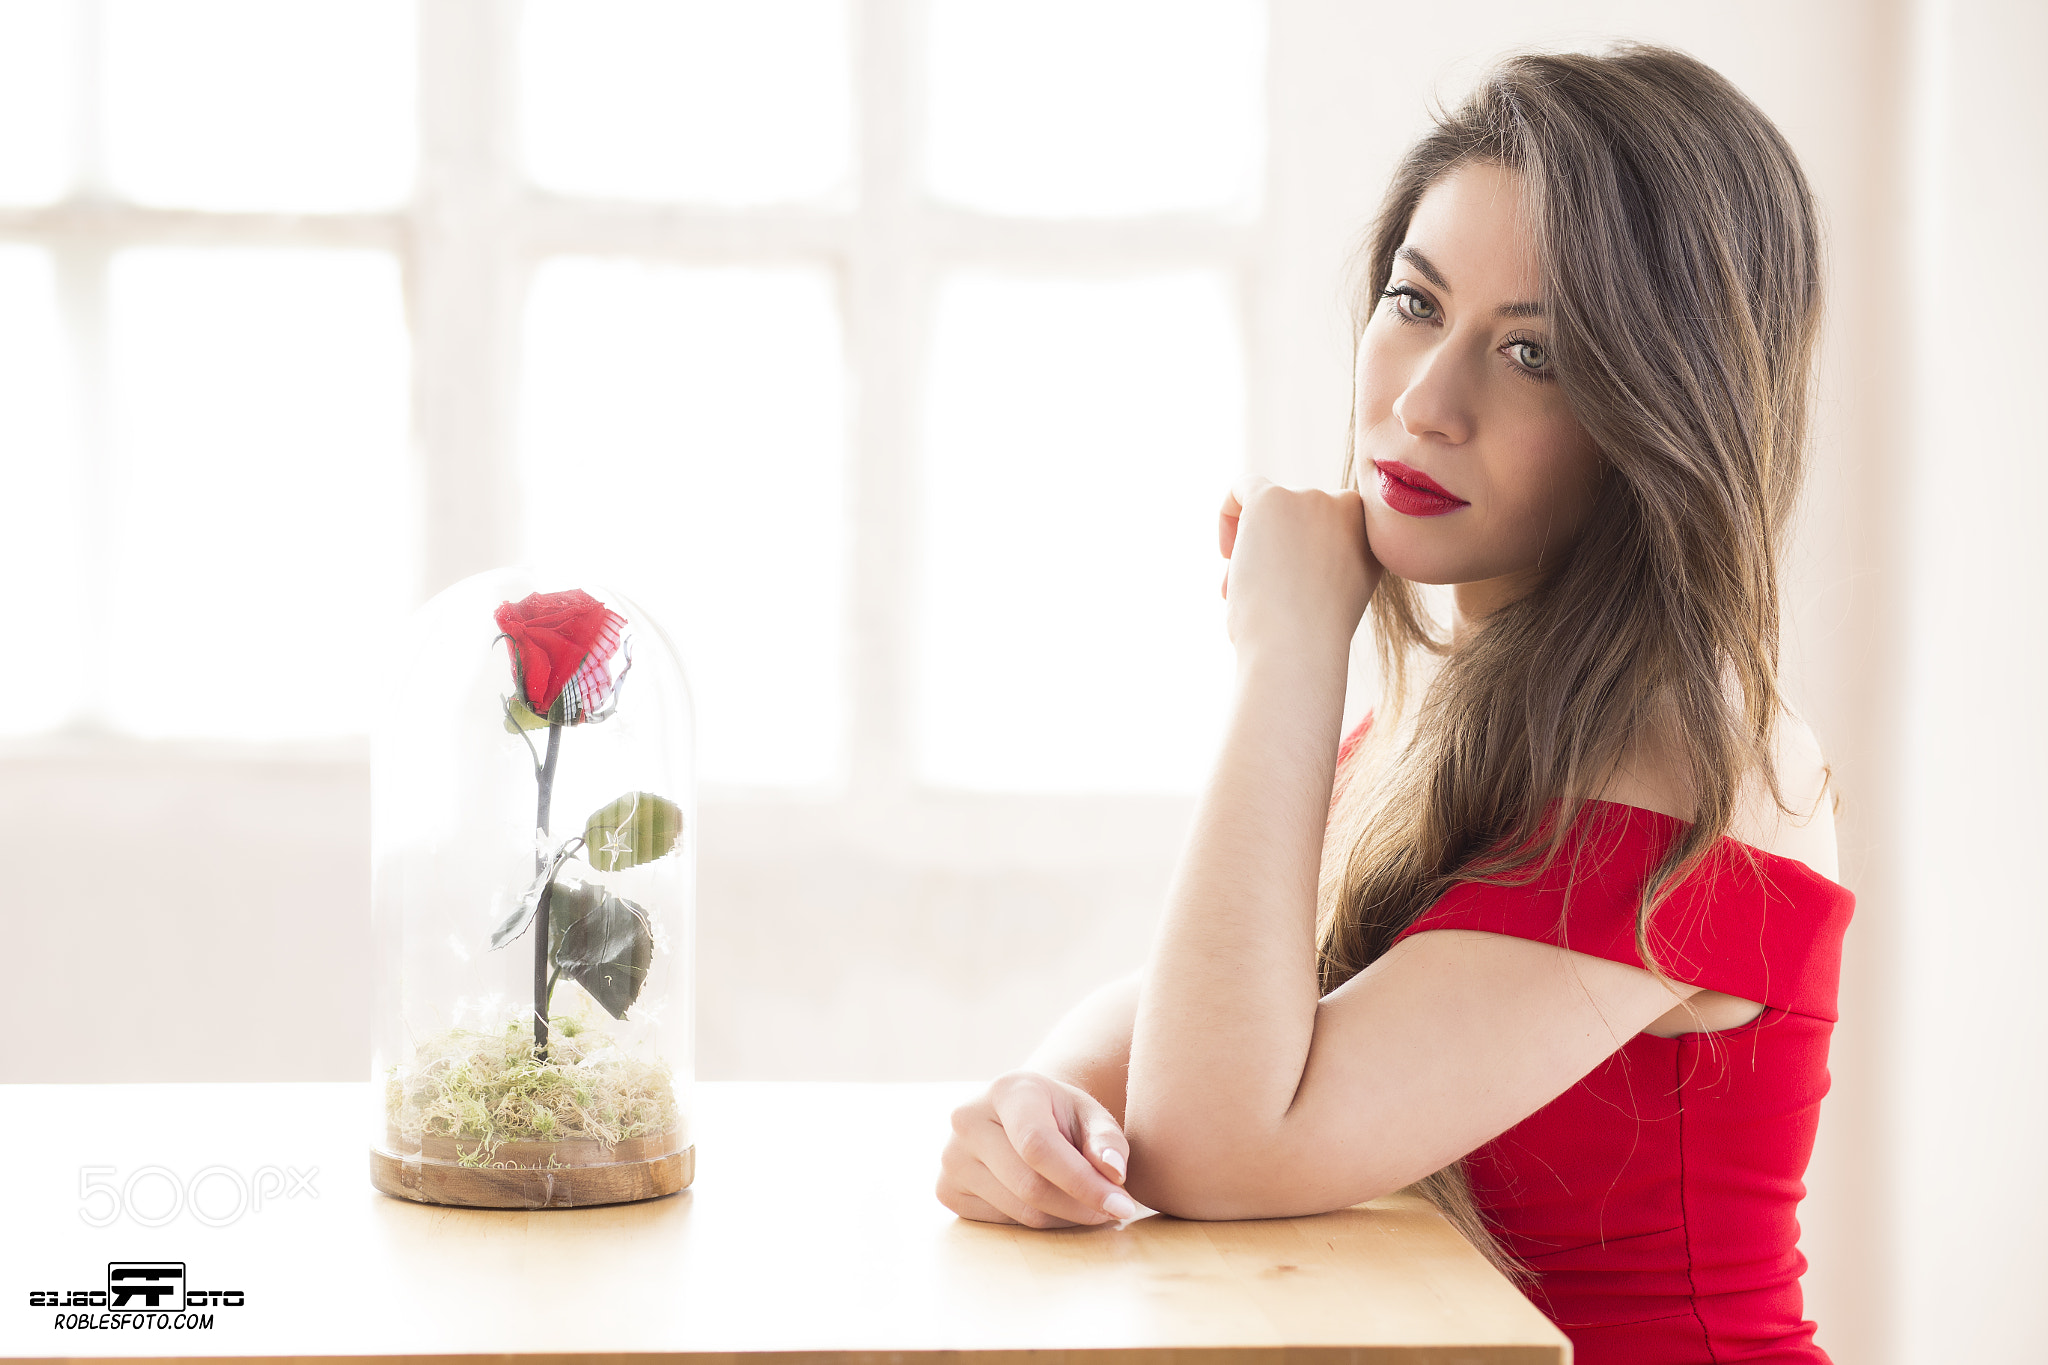 People 2048x1365 Marcos Muñoz Martinez  flowers brunette women women indoors 500px red lipstick red flowers rose red dress touching face overexposed watermarked